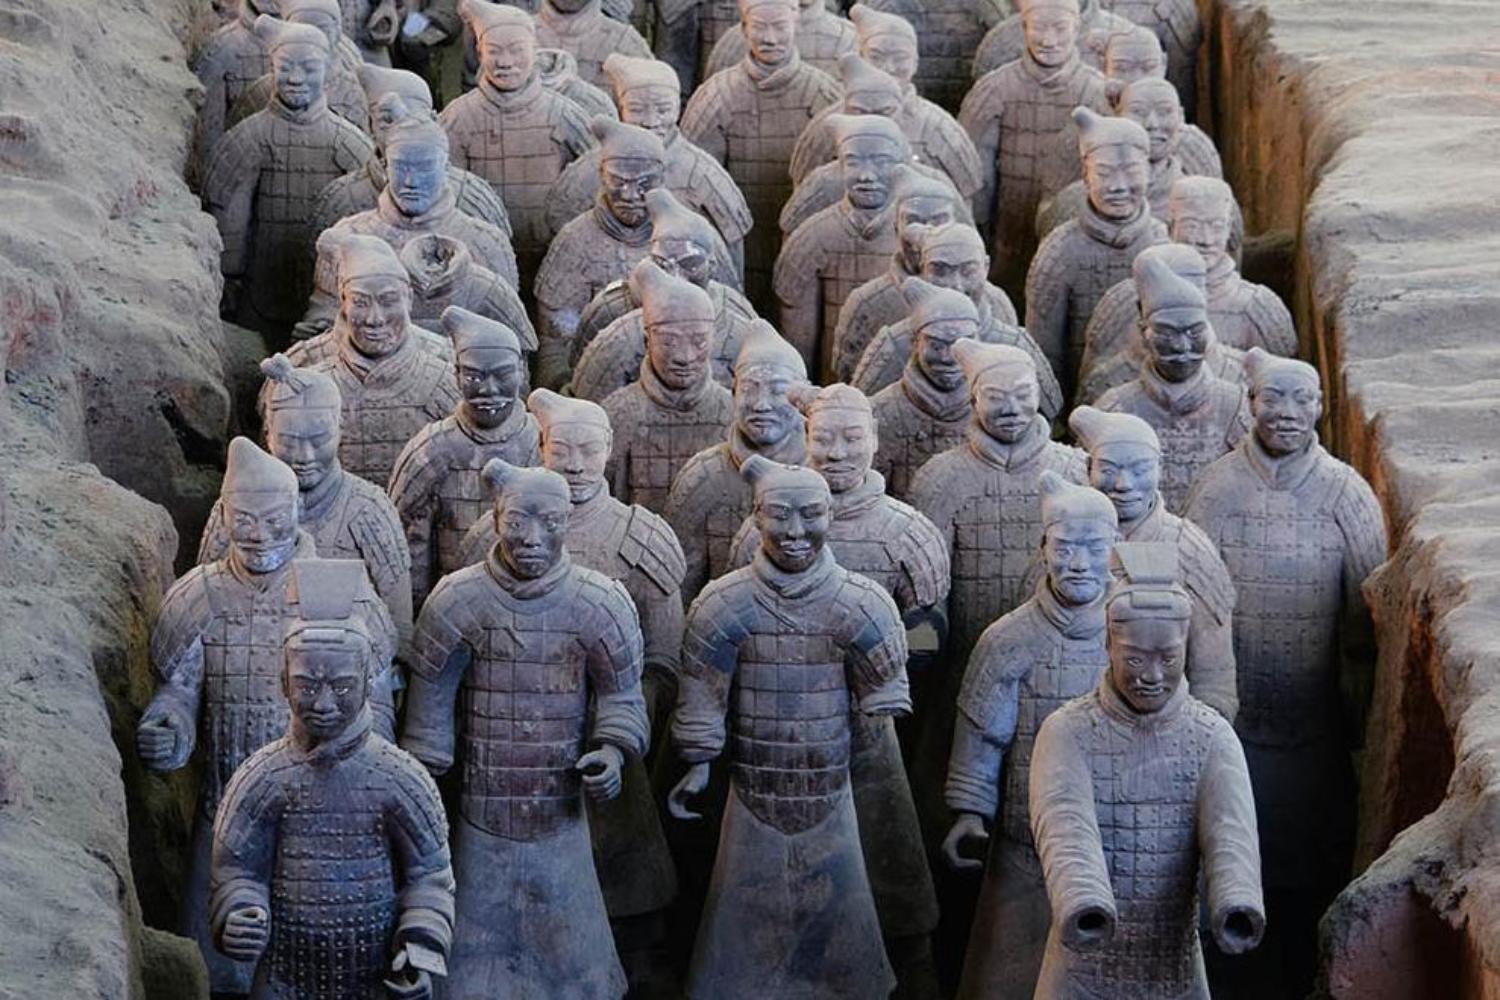 Terracotta Chinese soldier statues lined up in rows